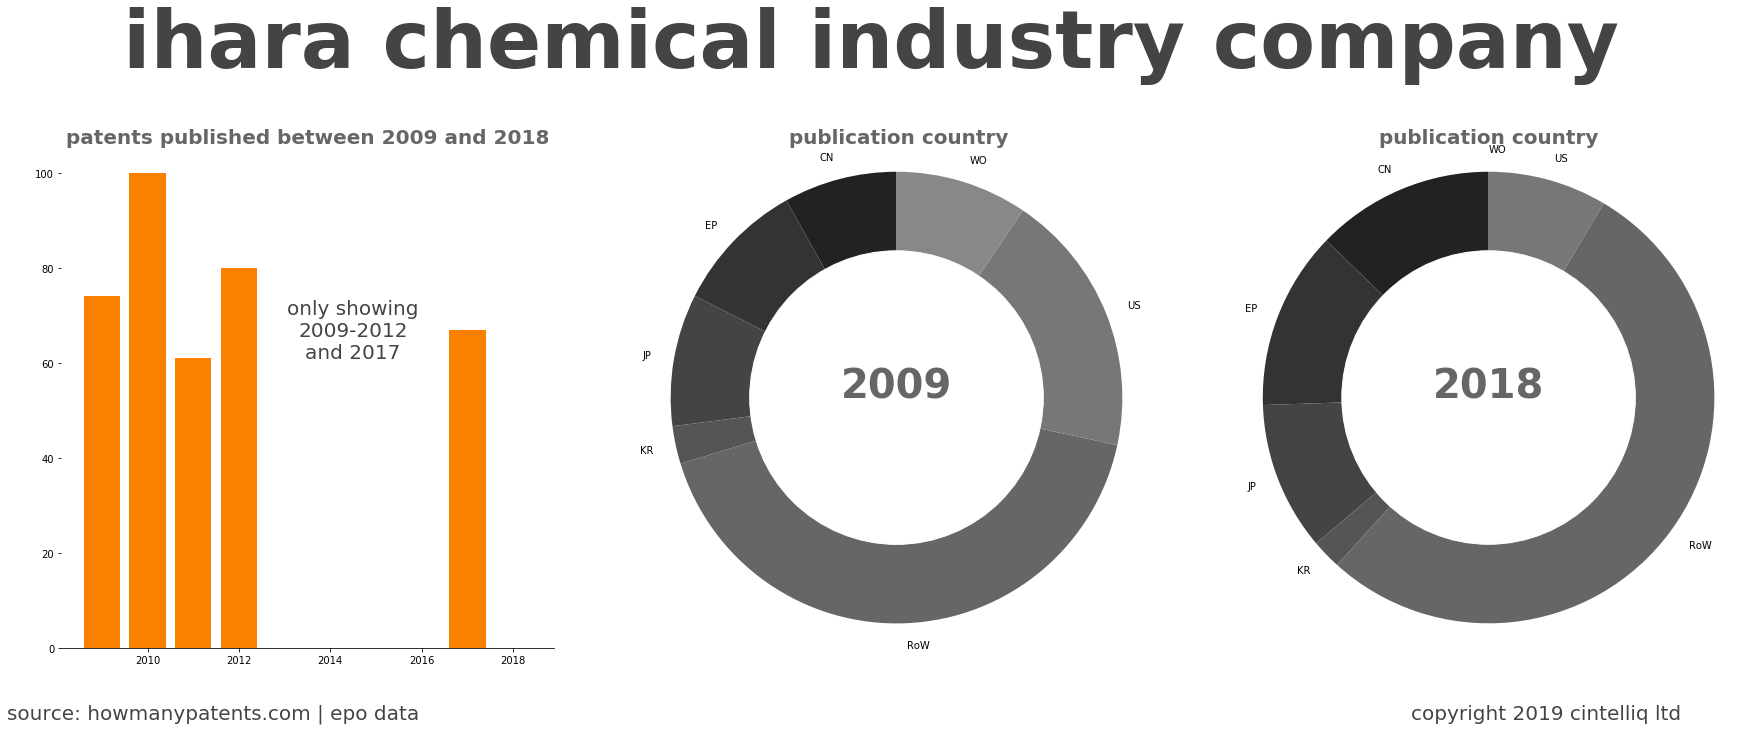 summary of patents for Ihara Chemical Industry Company